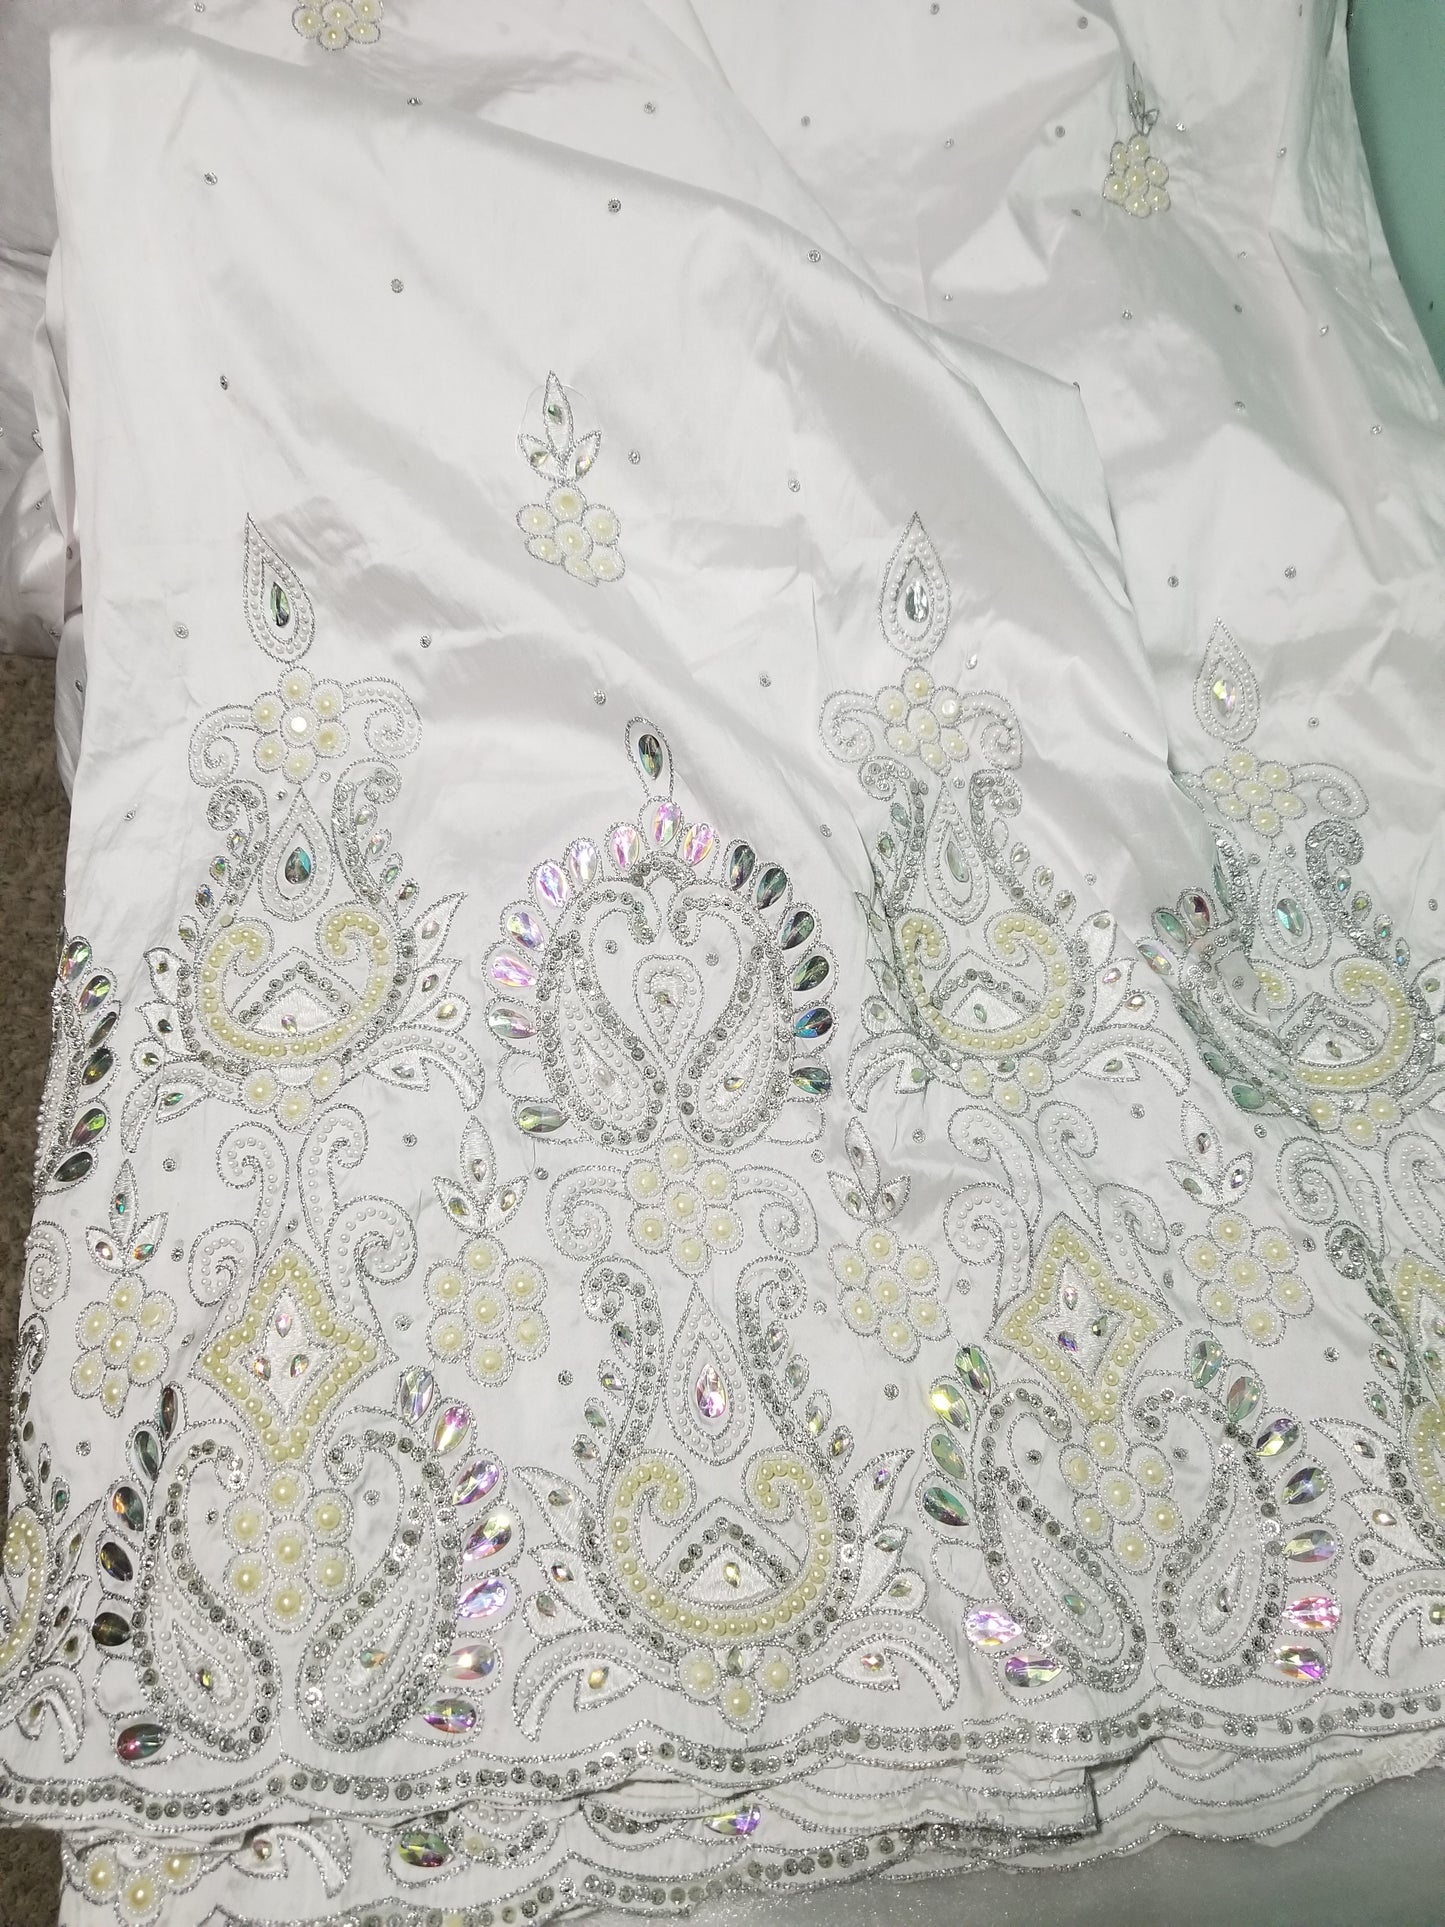 Price drop!! Pure White/White  hand stoned Silk George wrapper. Nigerian Bride beautiful in White George wrapper. Sold as a set of 2 wrapper + 1.8yds Net for blouse. Niger/delta/Igbo traditional bridal outfit. Quality stone work to perfection?